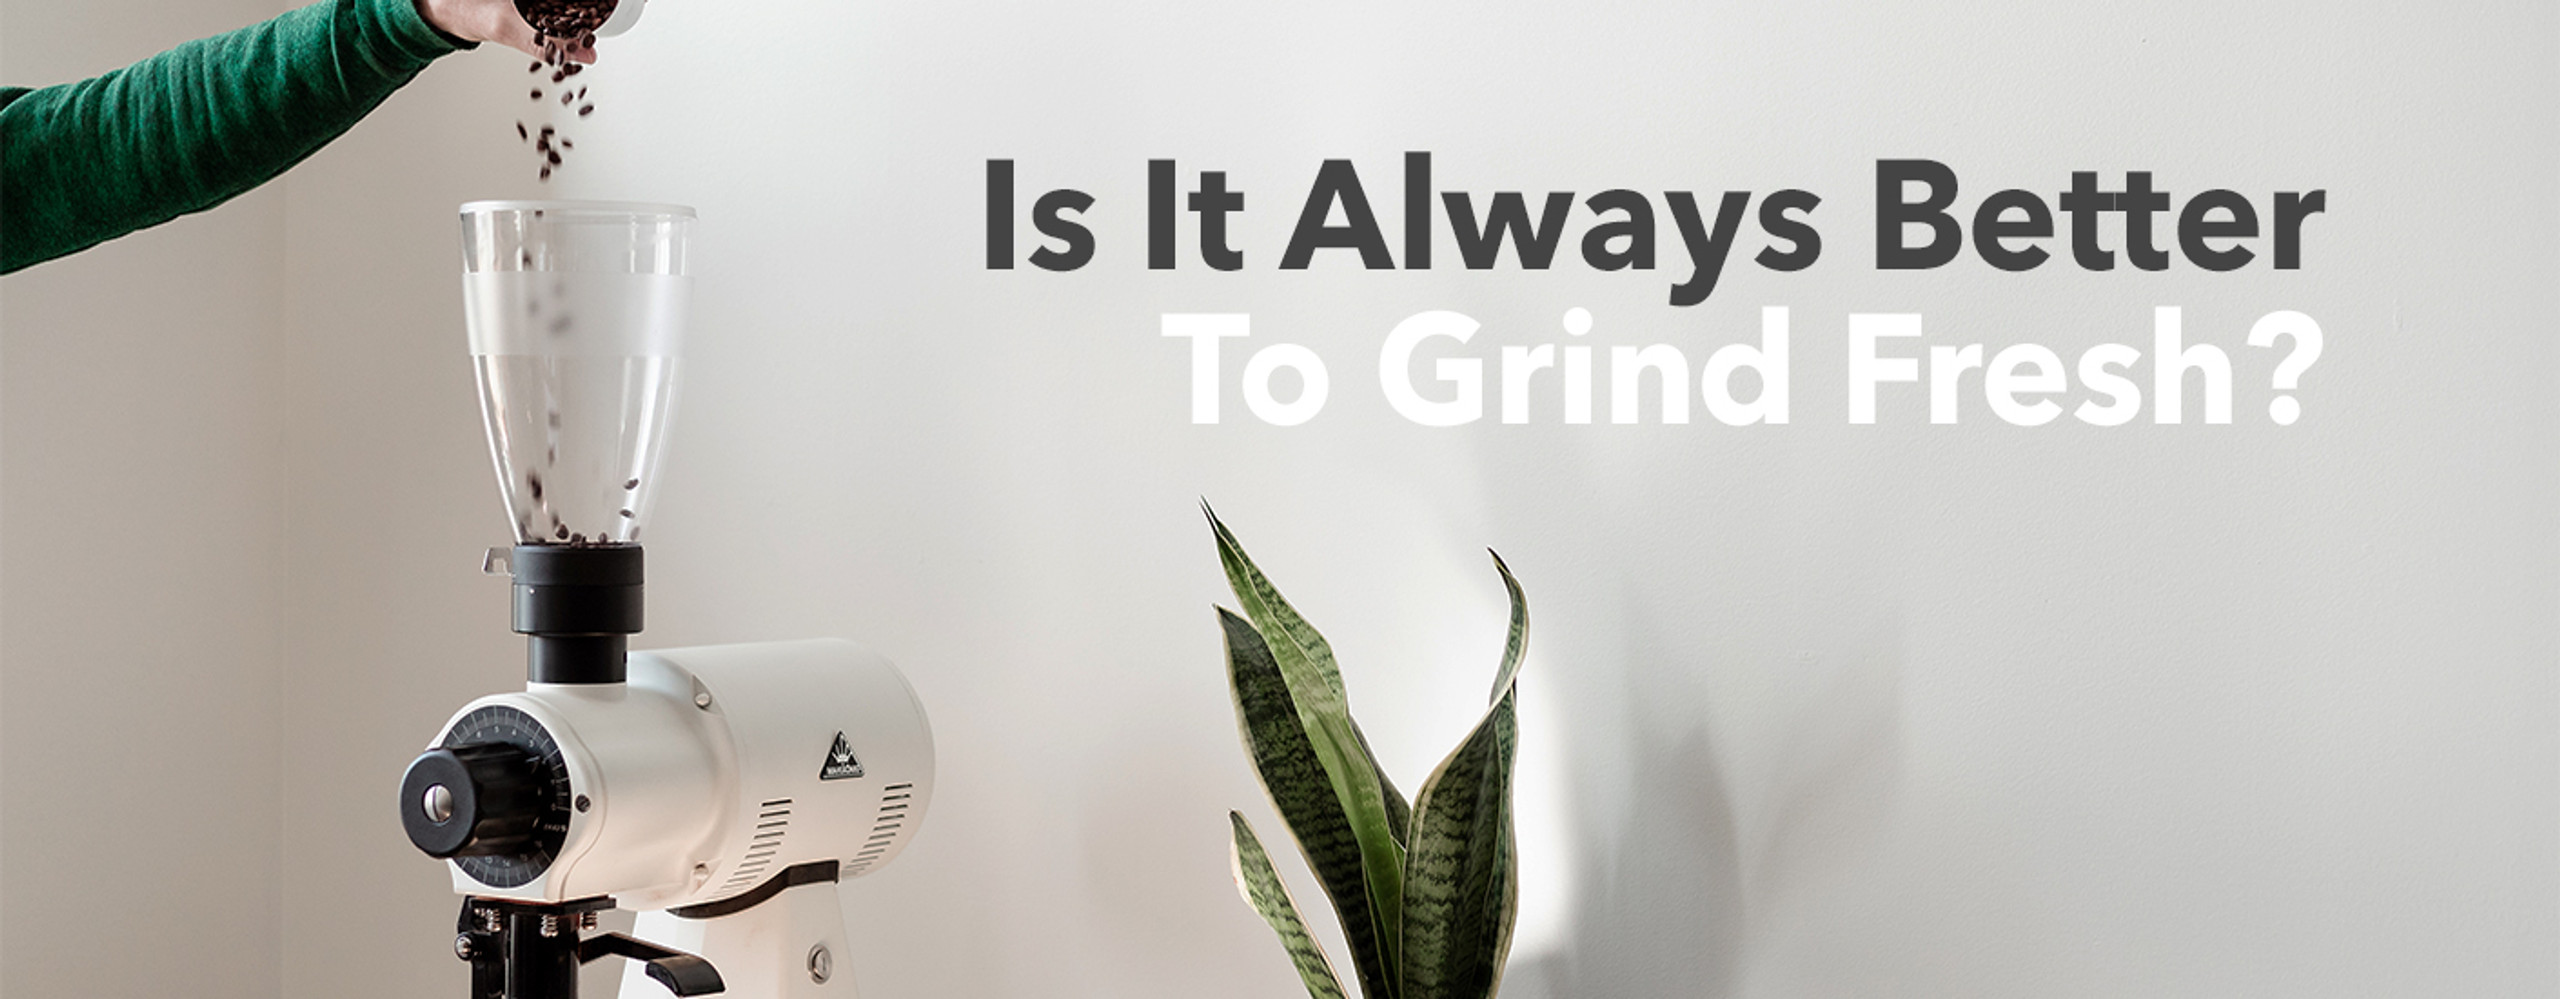 Is It Always Better to Grind Fresh?